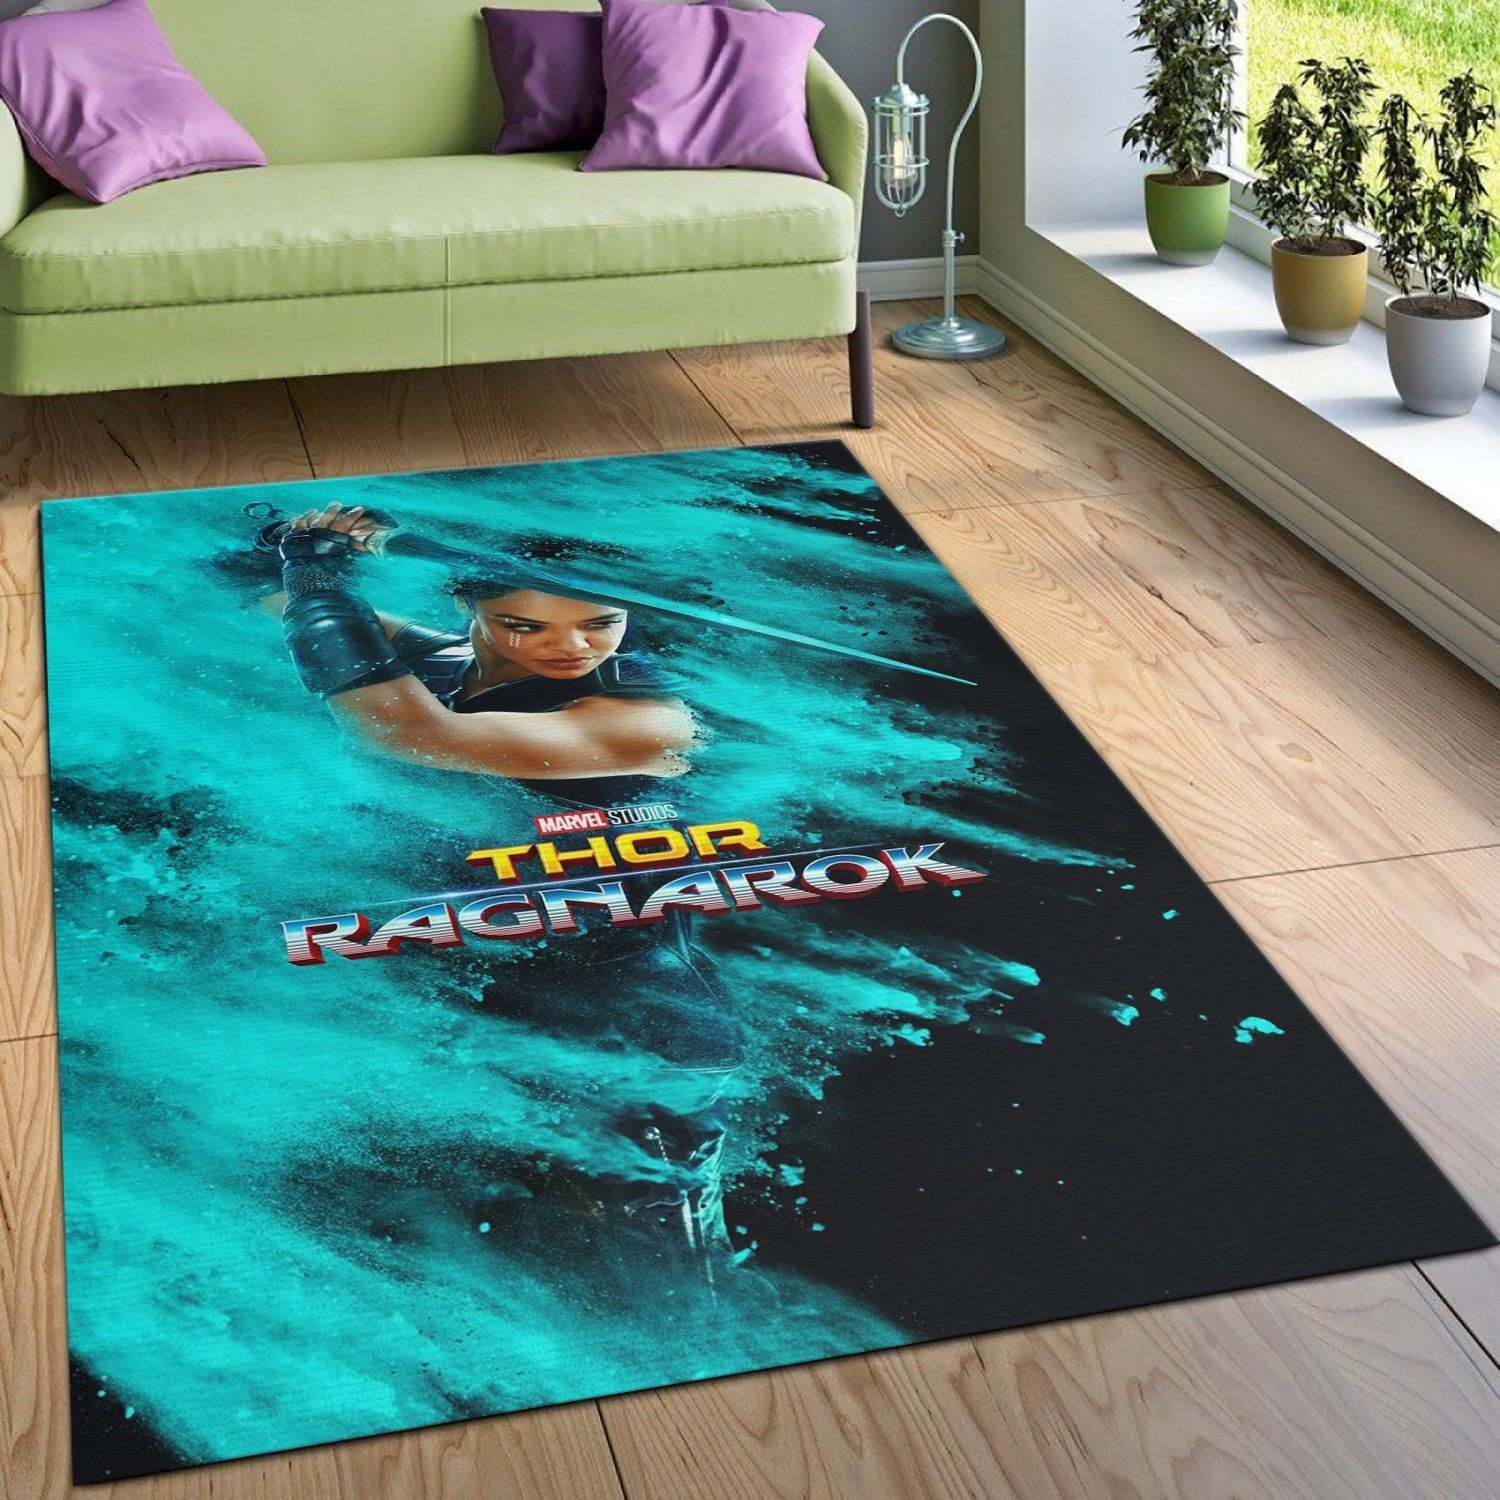 Thor Ragnarok Valkyrie Area Rug For Christmas, Bedroom, Christmas Gift US Decor - Indoor Outdoor Rugs 2